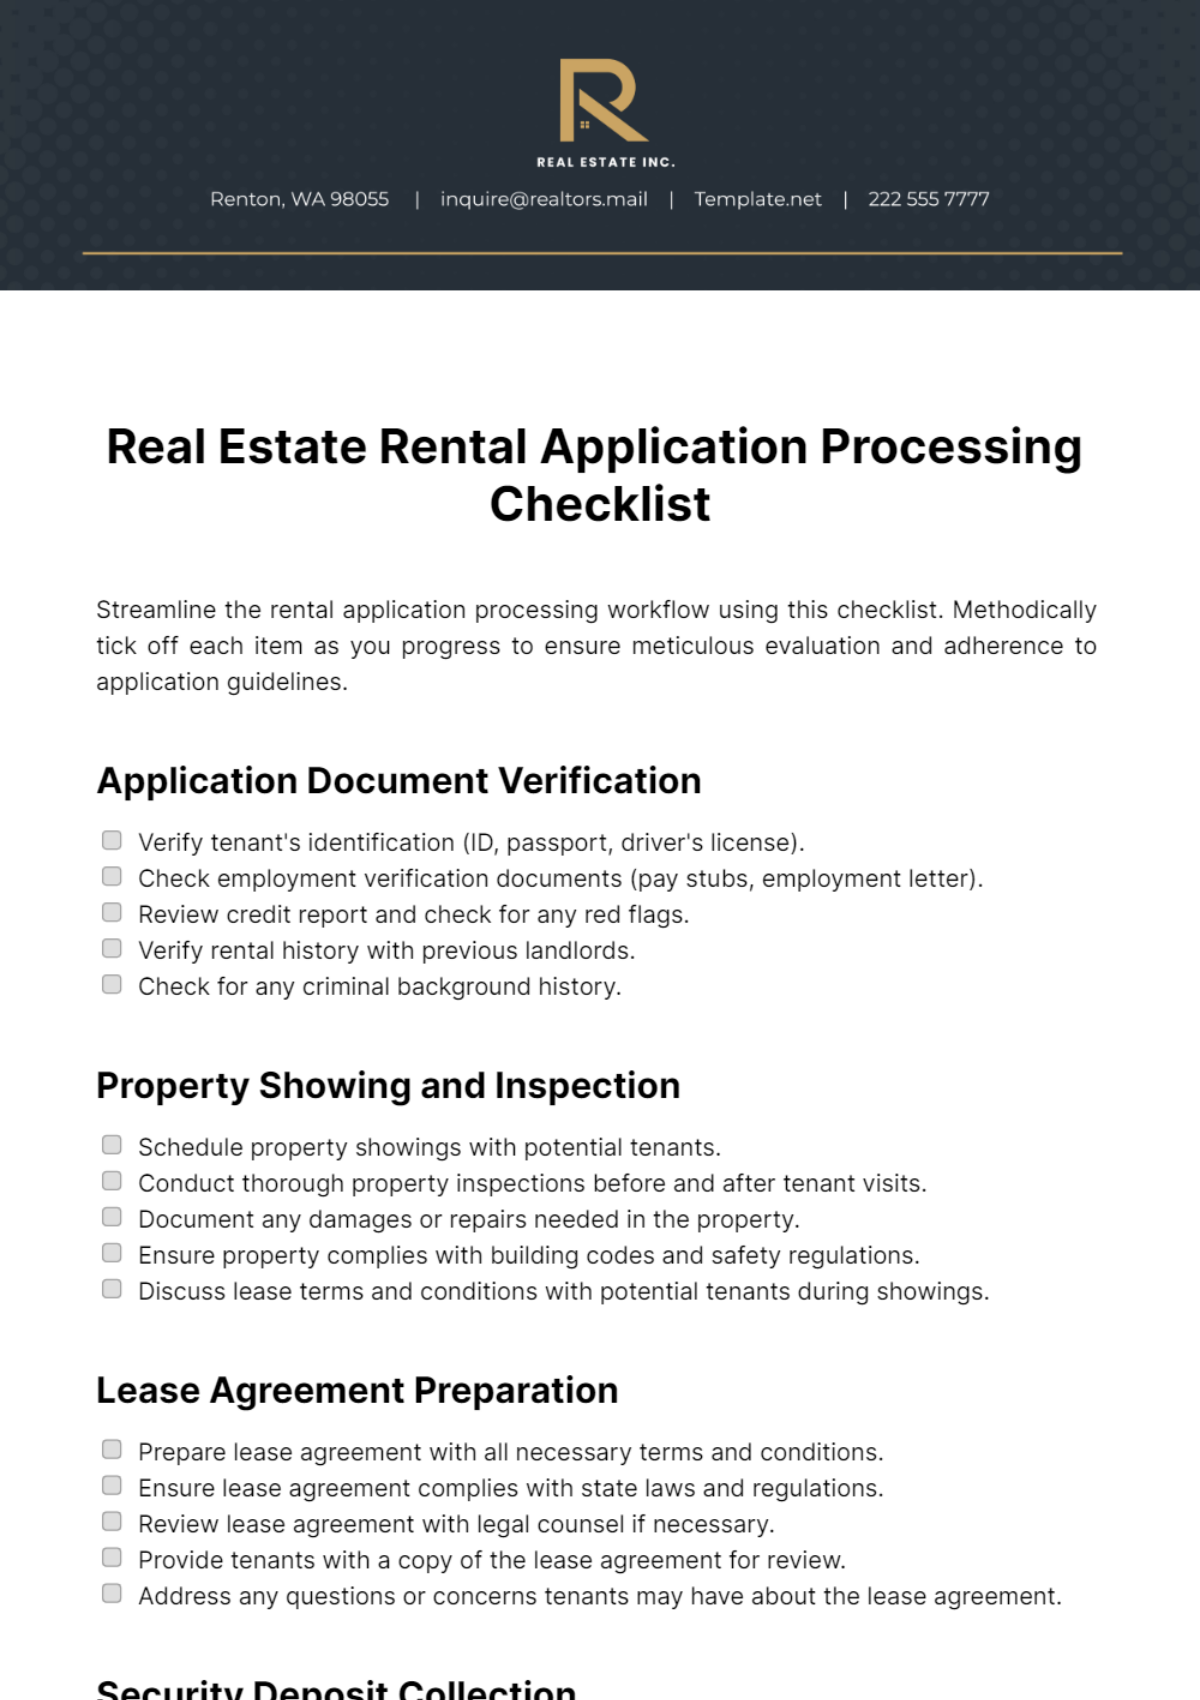 Real Estate Rental Application Processing Checklist Template